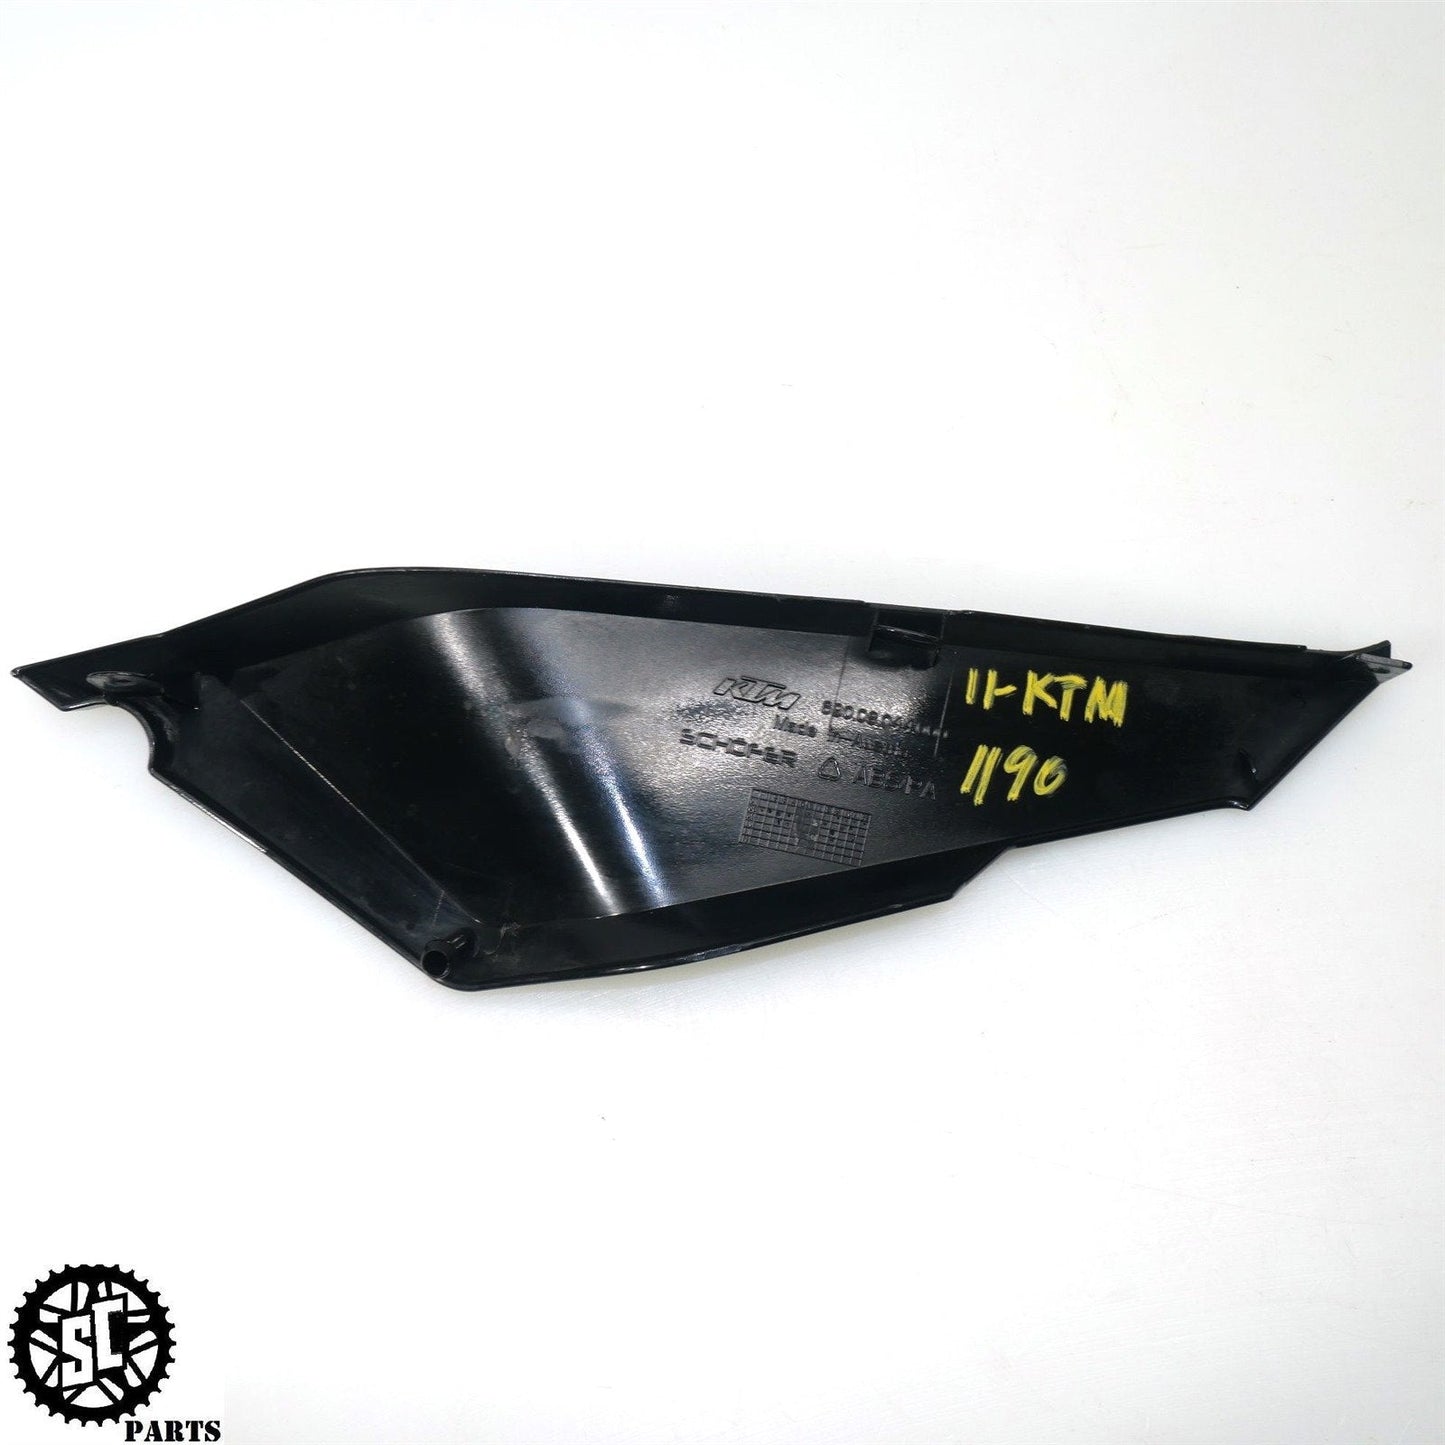 2011 KTM RC8 1190 LEFT GAS TANK SEAT SIDE FAIRING COVER 6900804300028A KT02